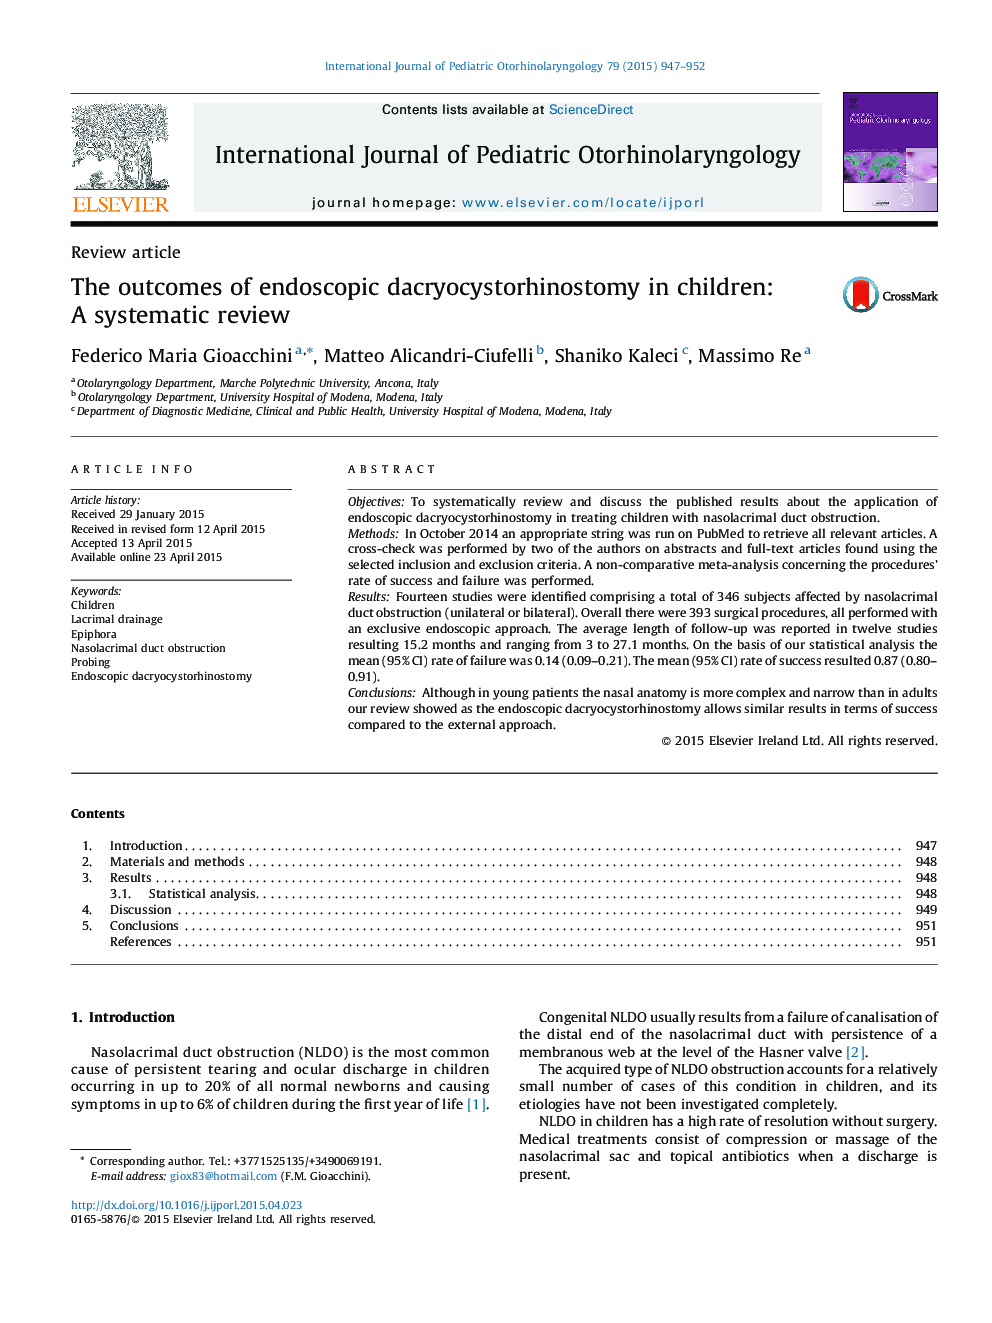 The outcomes of endoscopic dacryocystorhinostomy in children: A systematic review